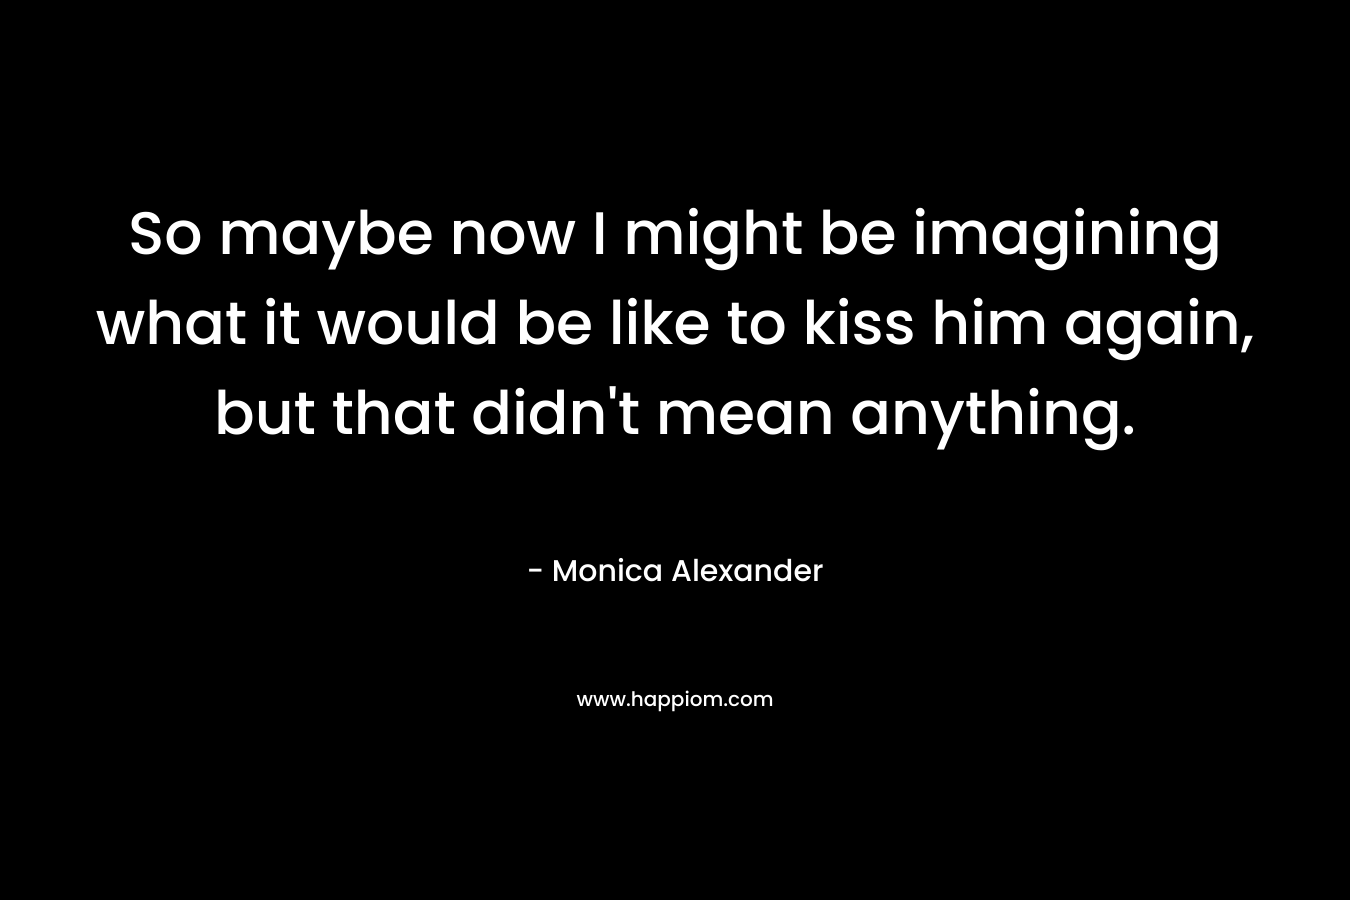 So maybe now I might be imagining what it would be like to kiss him again, but that didn't mean anything.